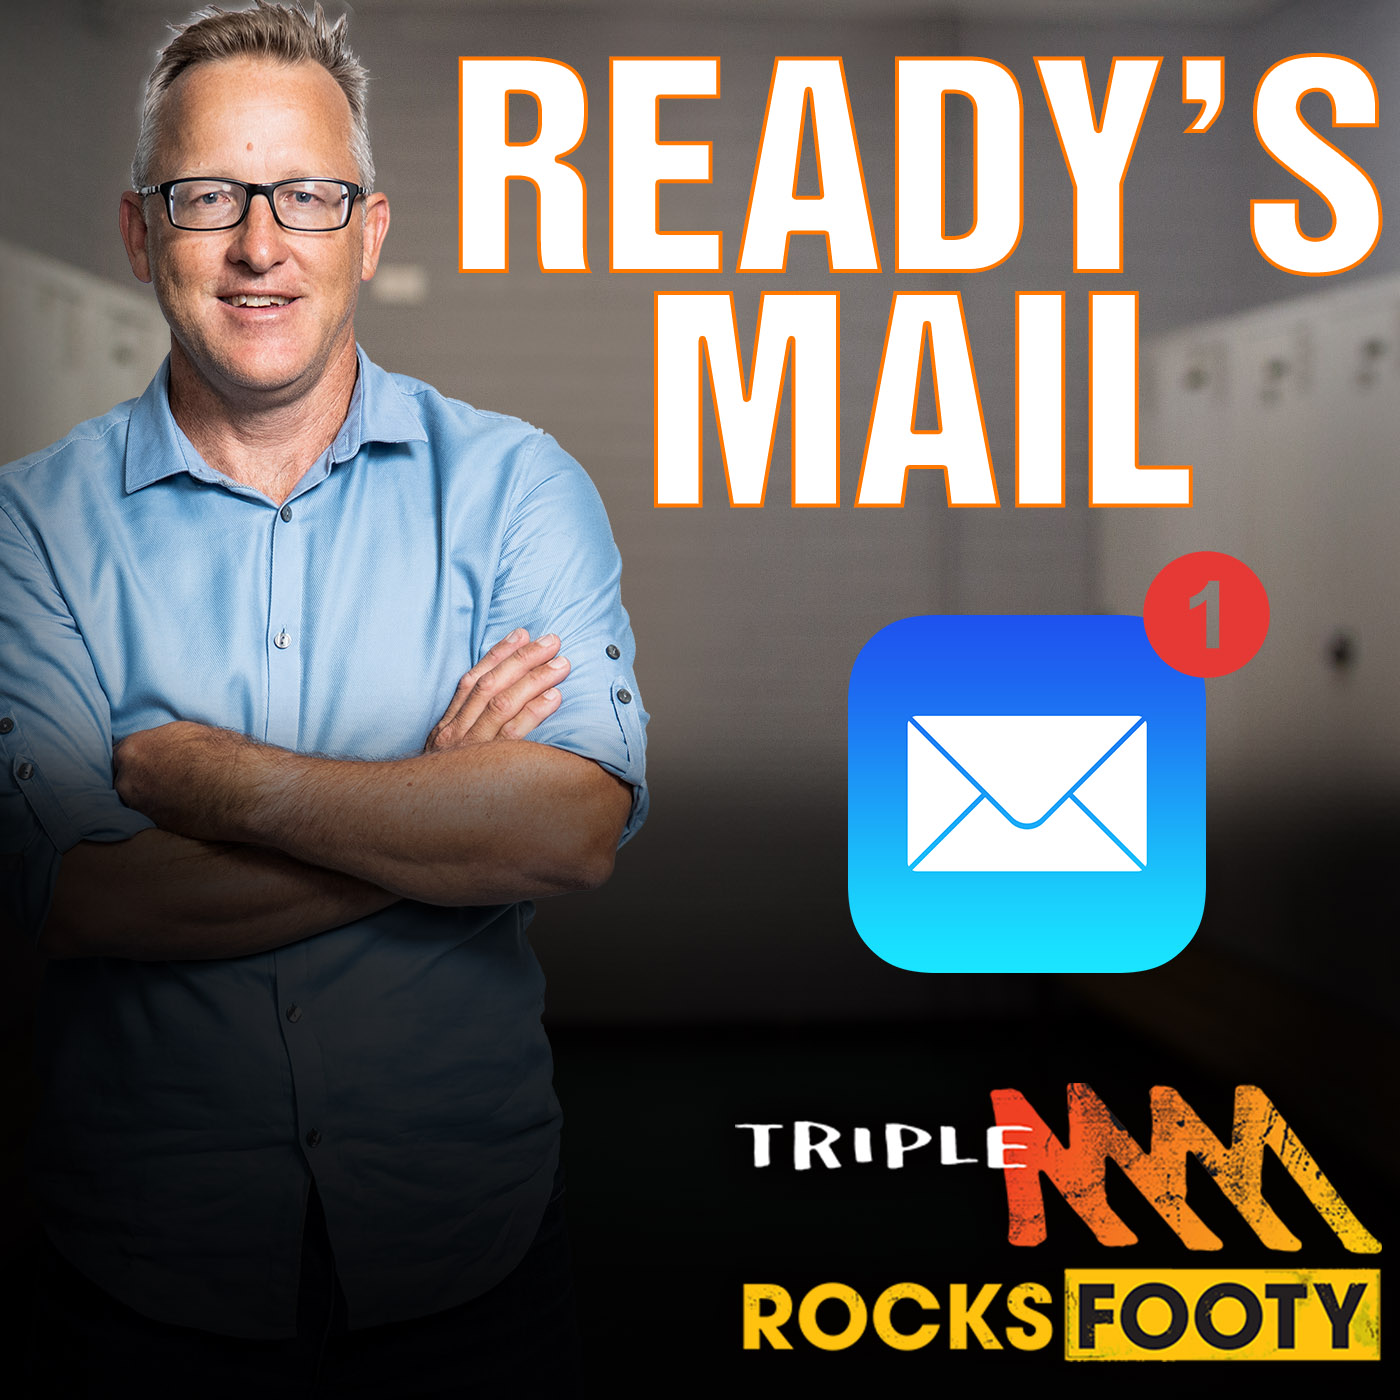 Ready's Mail | Matt Dufty's Club Future, Panthers Struggling To Keep Stars, Knights Junior On The Move?